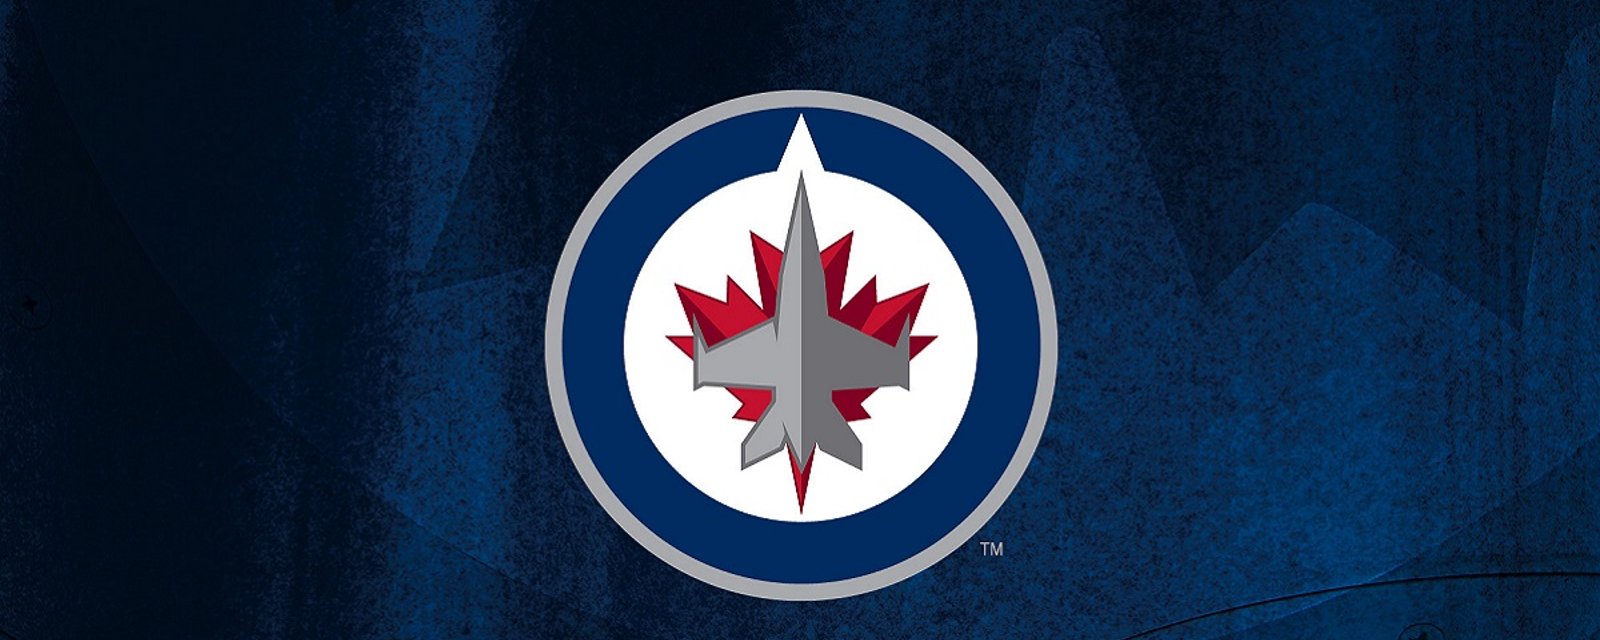 Breaking: Major announcement expected from the Winnipeg Jets today.